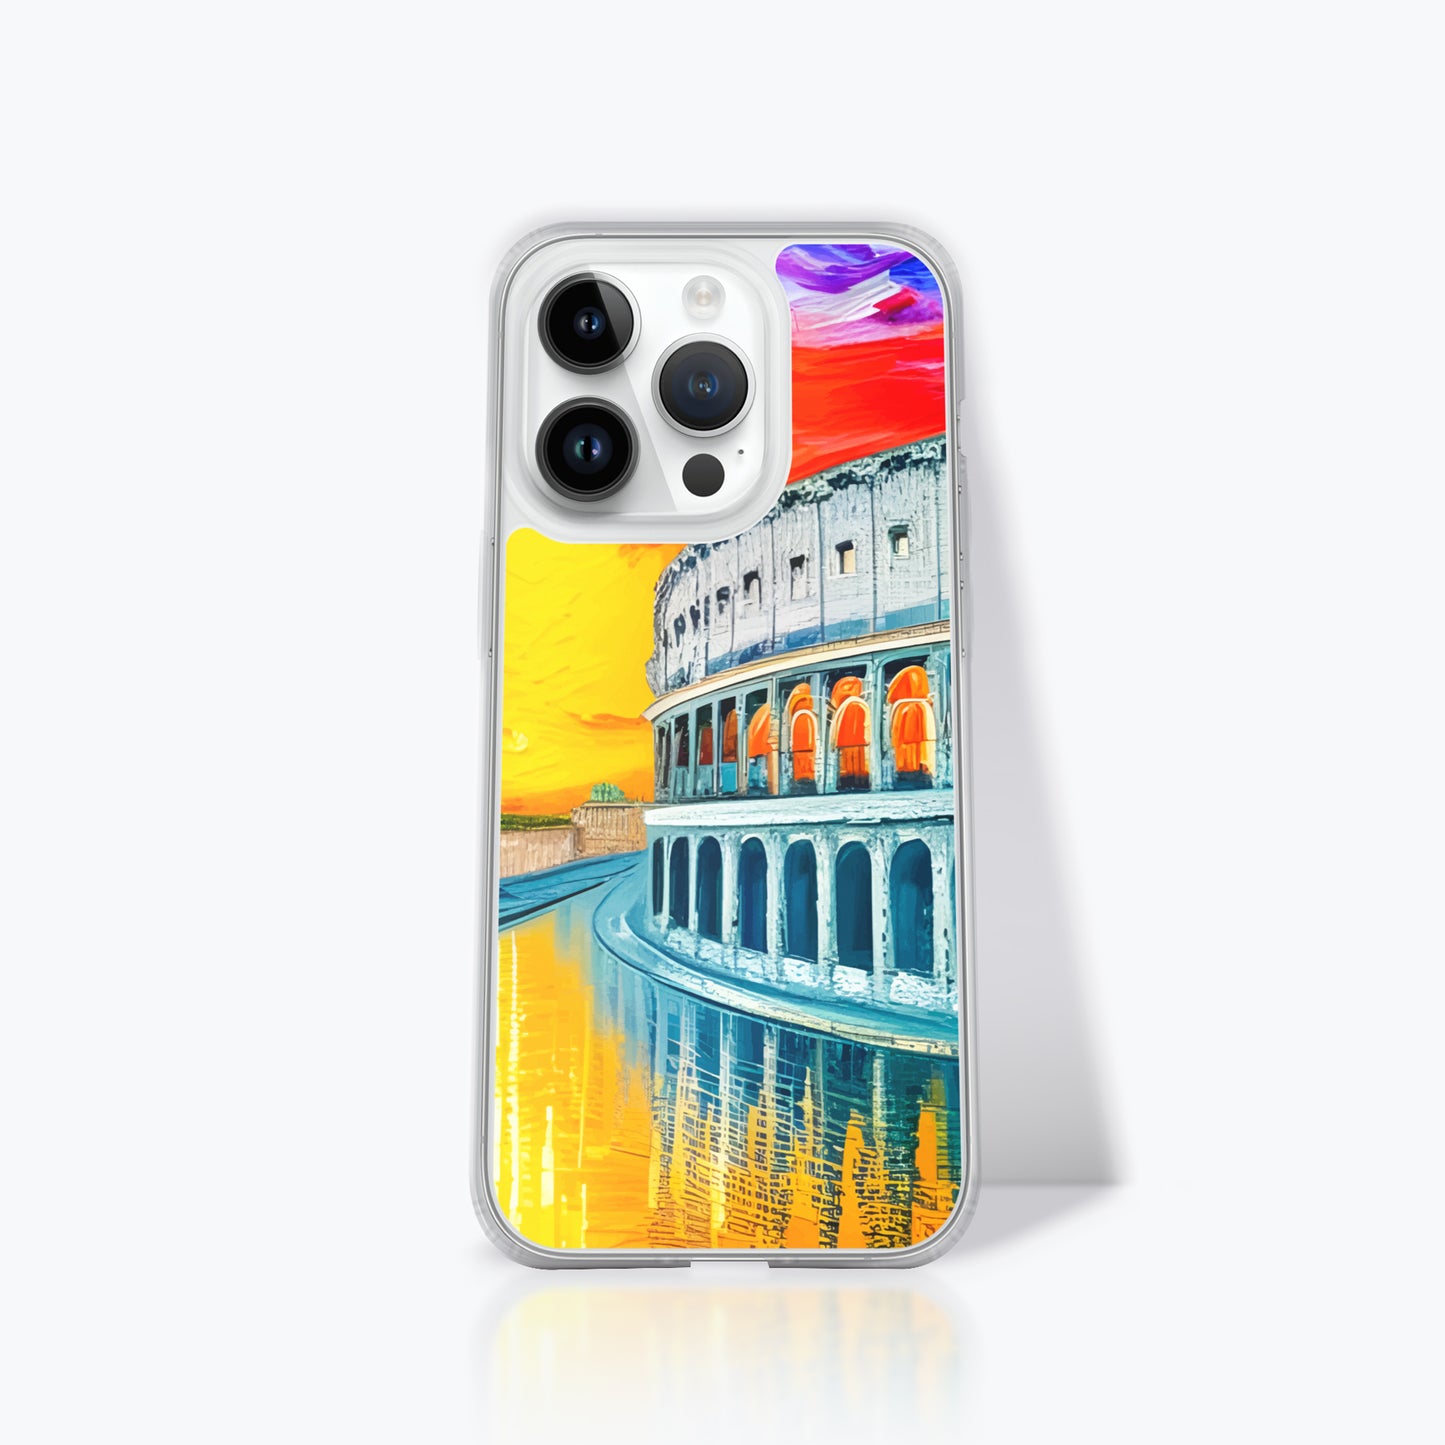 Fashionable iPhone Case with cityscape painting - Rome| Seepu | 